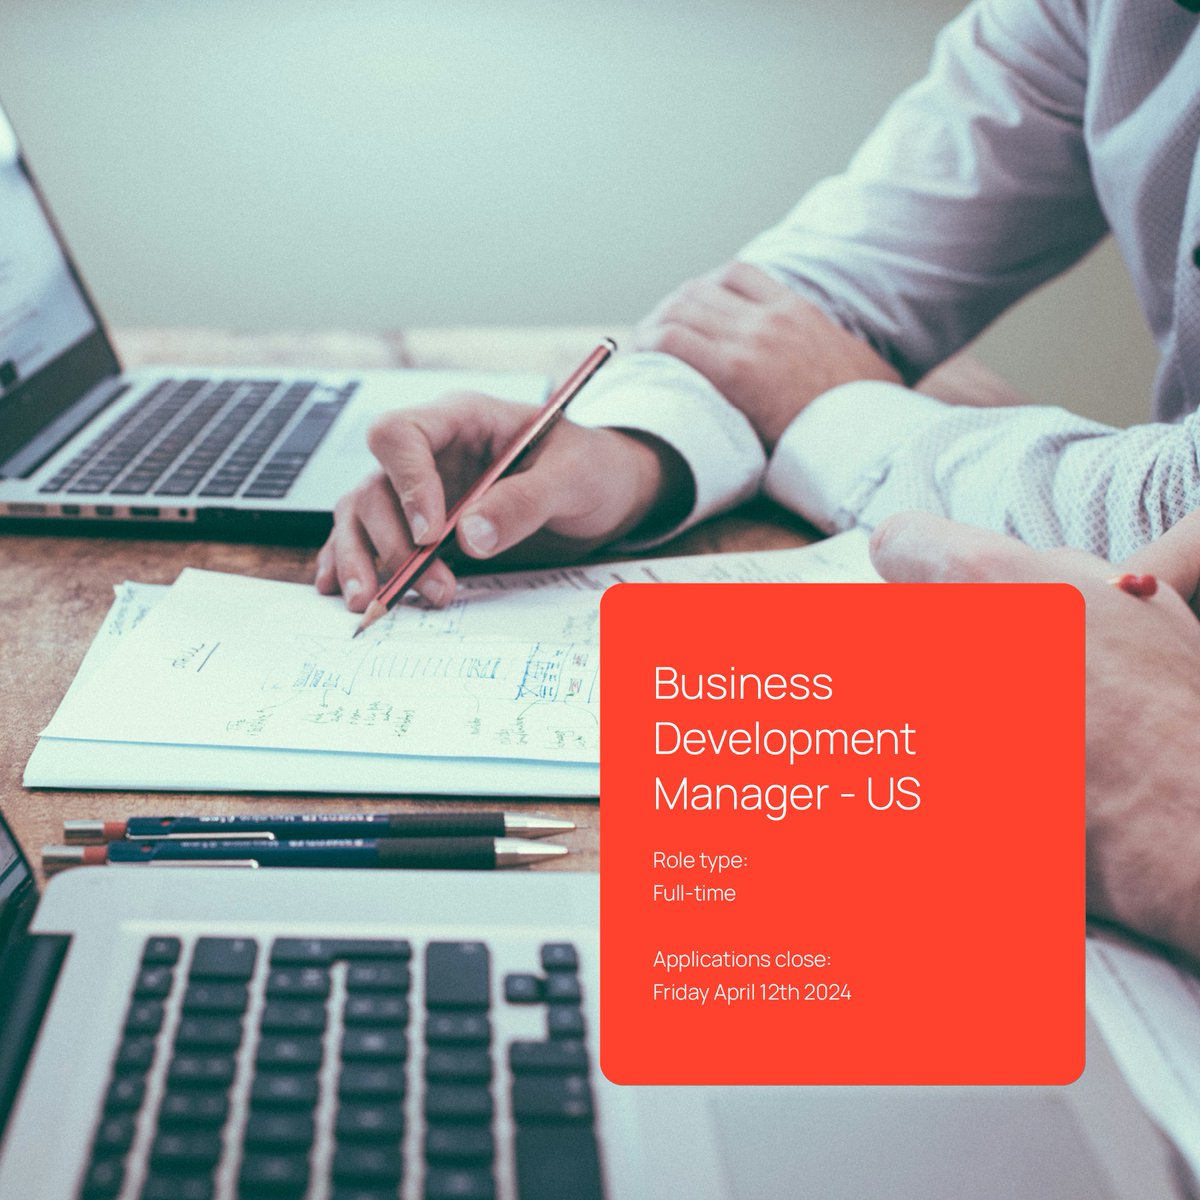 Deadline day! 📅 If you're intending to apply for our Business Development Manager role in the US, today is the final date to submit your CV and covering letter. All the details are here: bit.ly/EPICxBDUS